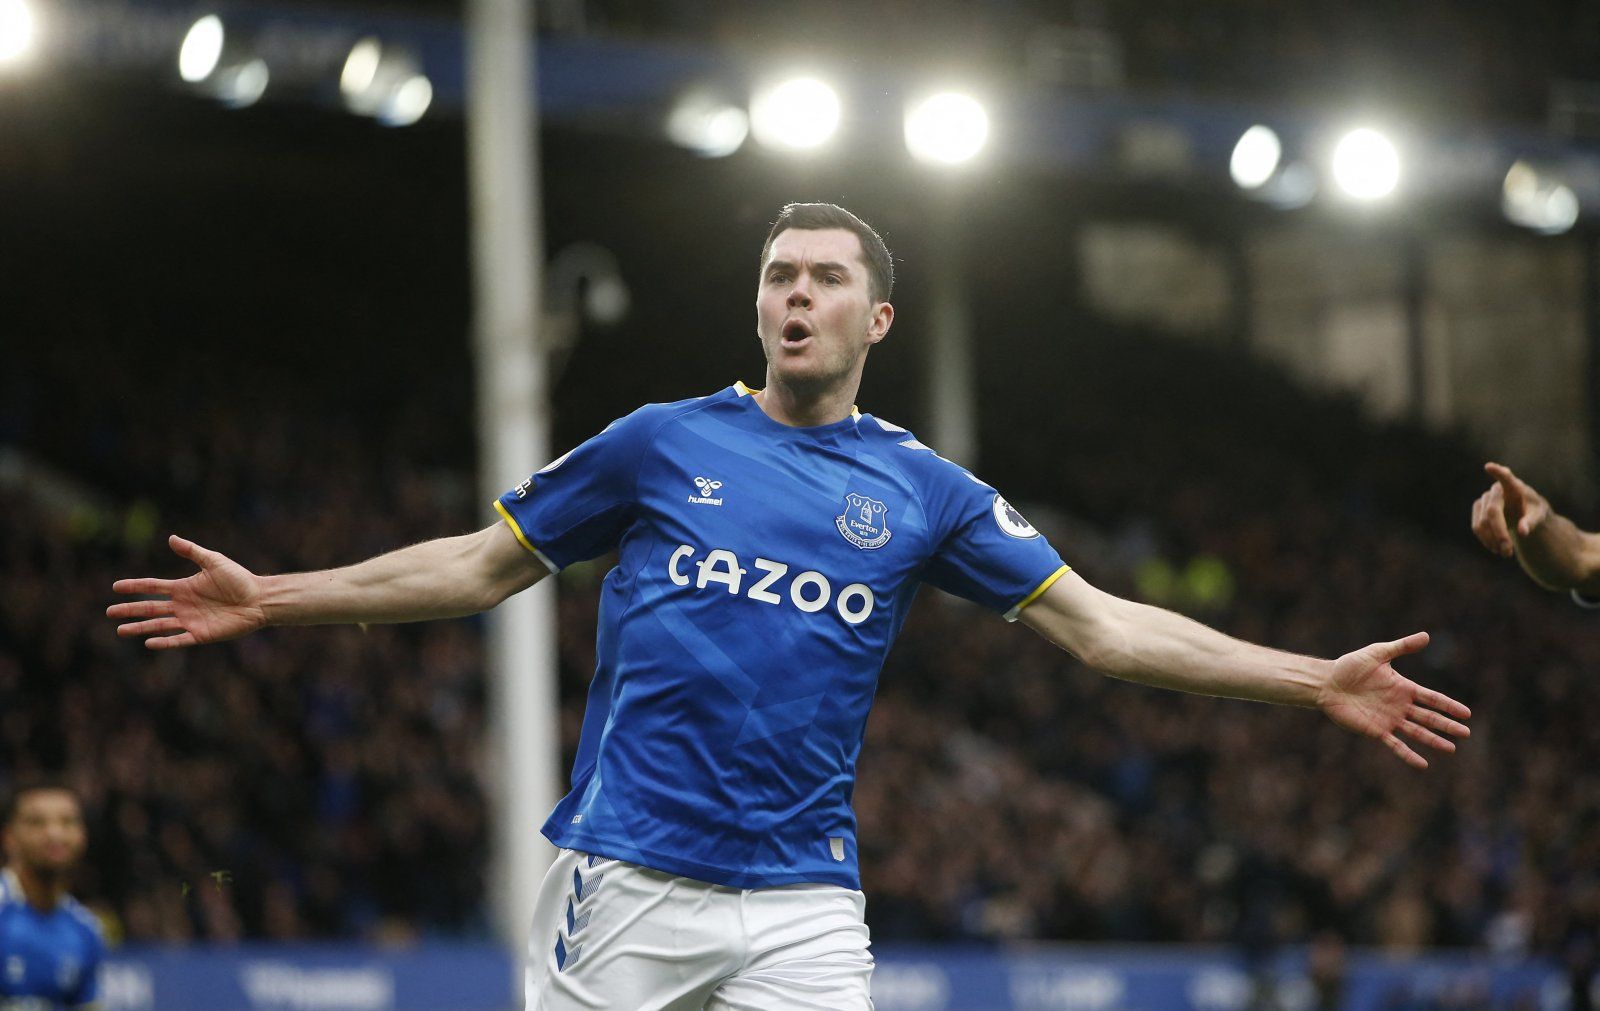 West Ham United now ‘favourites’ to sign Michael Keane -Follow up